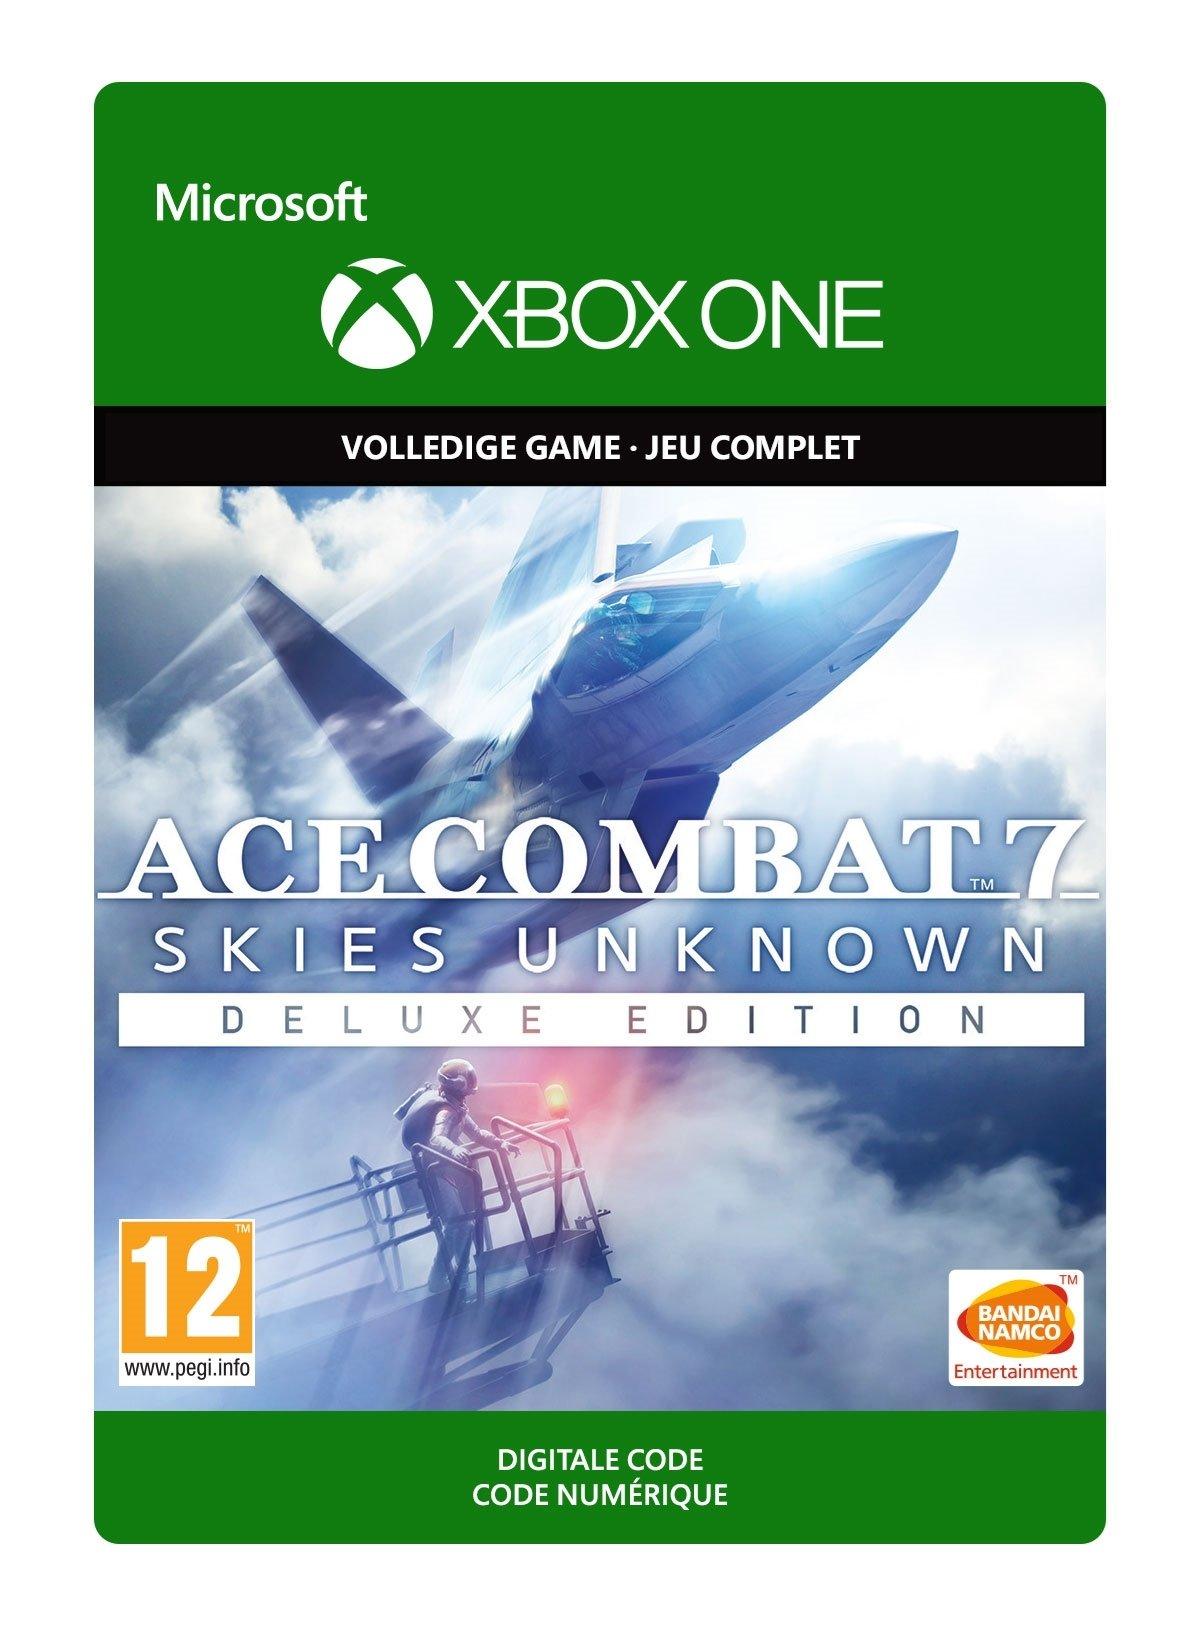 Ace Combat 7: Skies Unknown: Deluxe Edition (Post Launch) - Xbox One - Game | G3Q-00653 (b25d92ae-232a-5c4d-8bdb-f7e95b2d8e66)